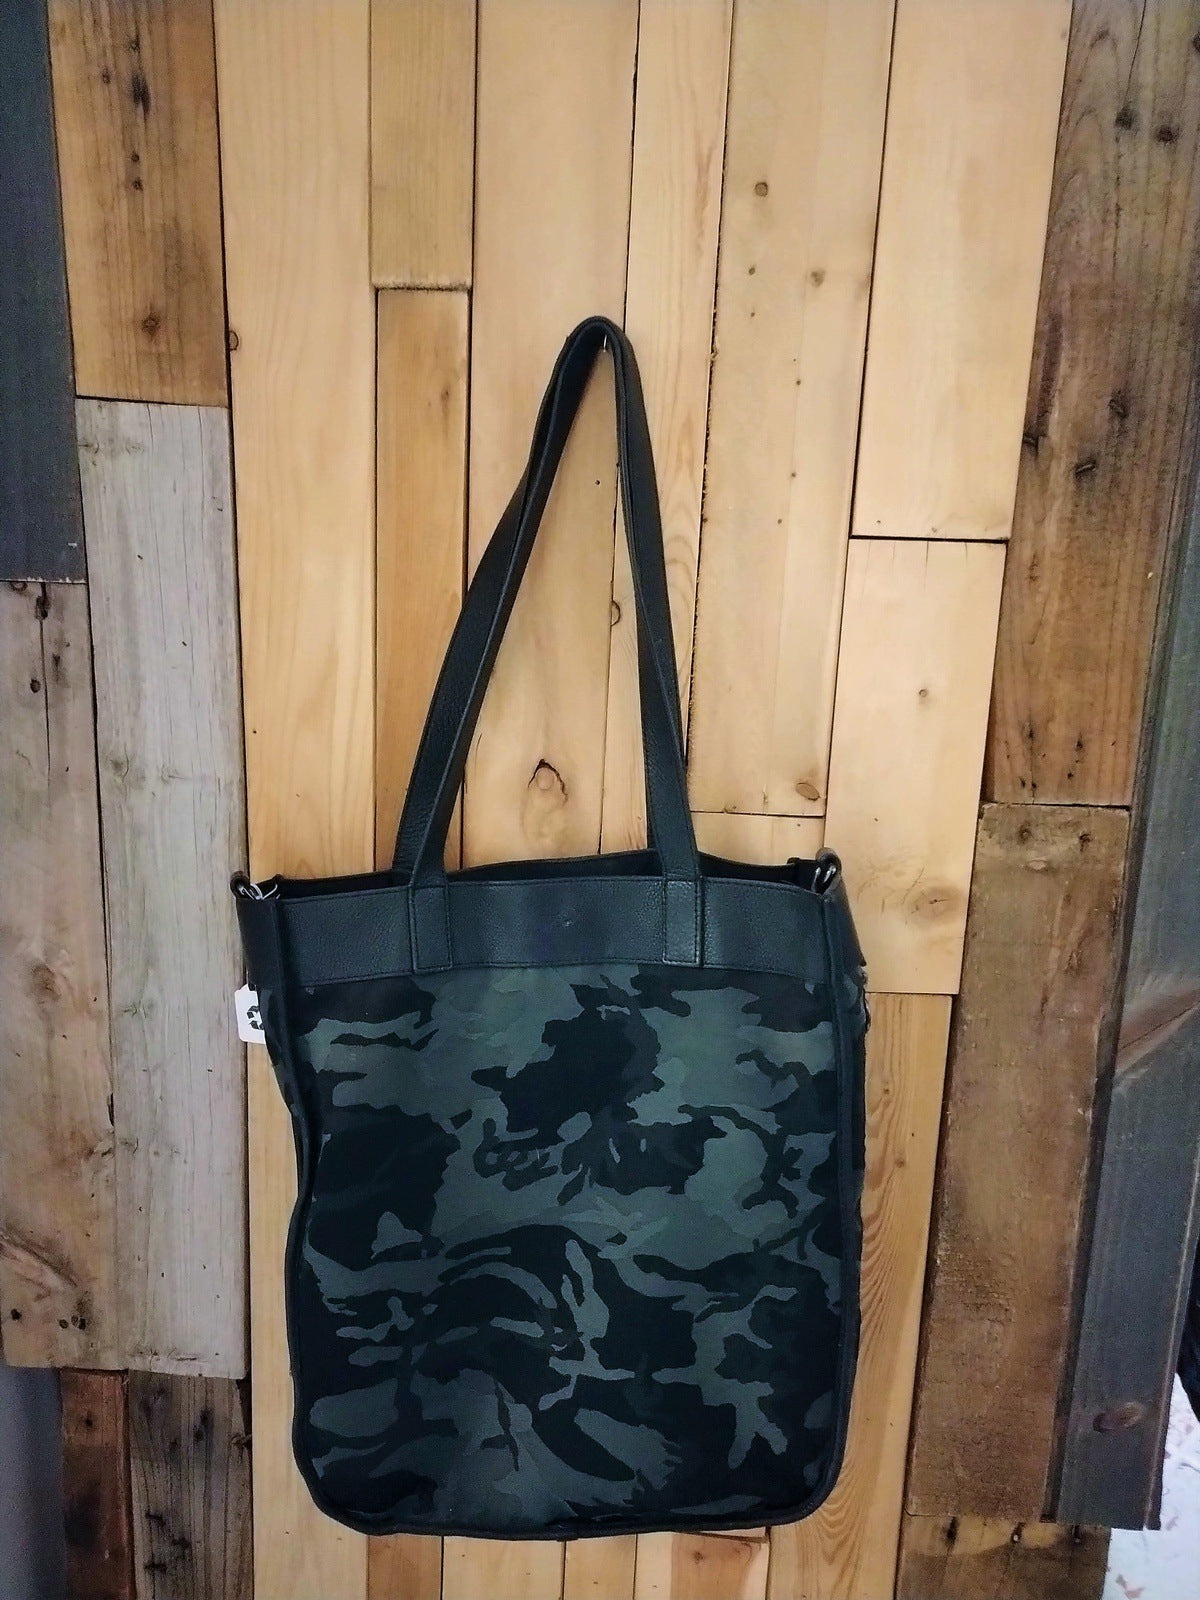 Black Camouflage Tote Bag Lululemon – Recycled Rock and Roll